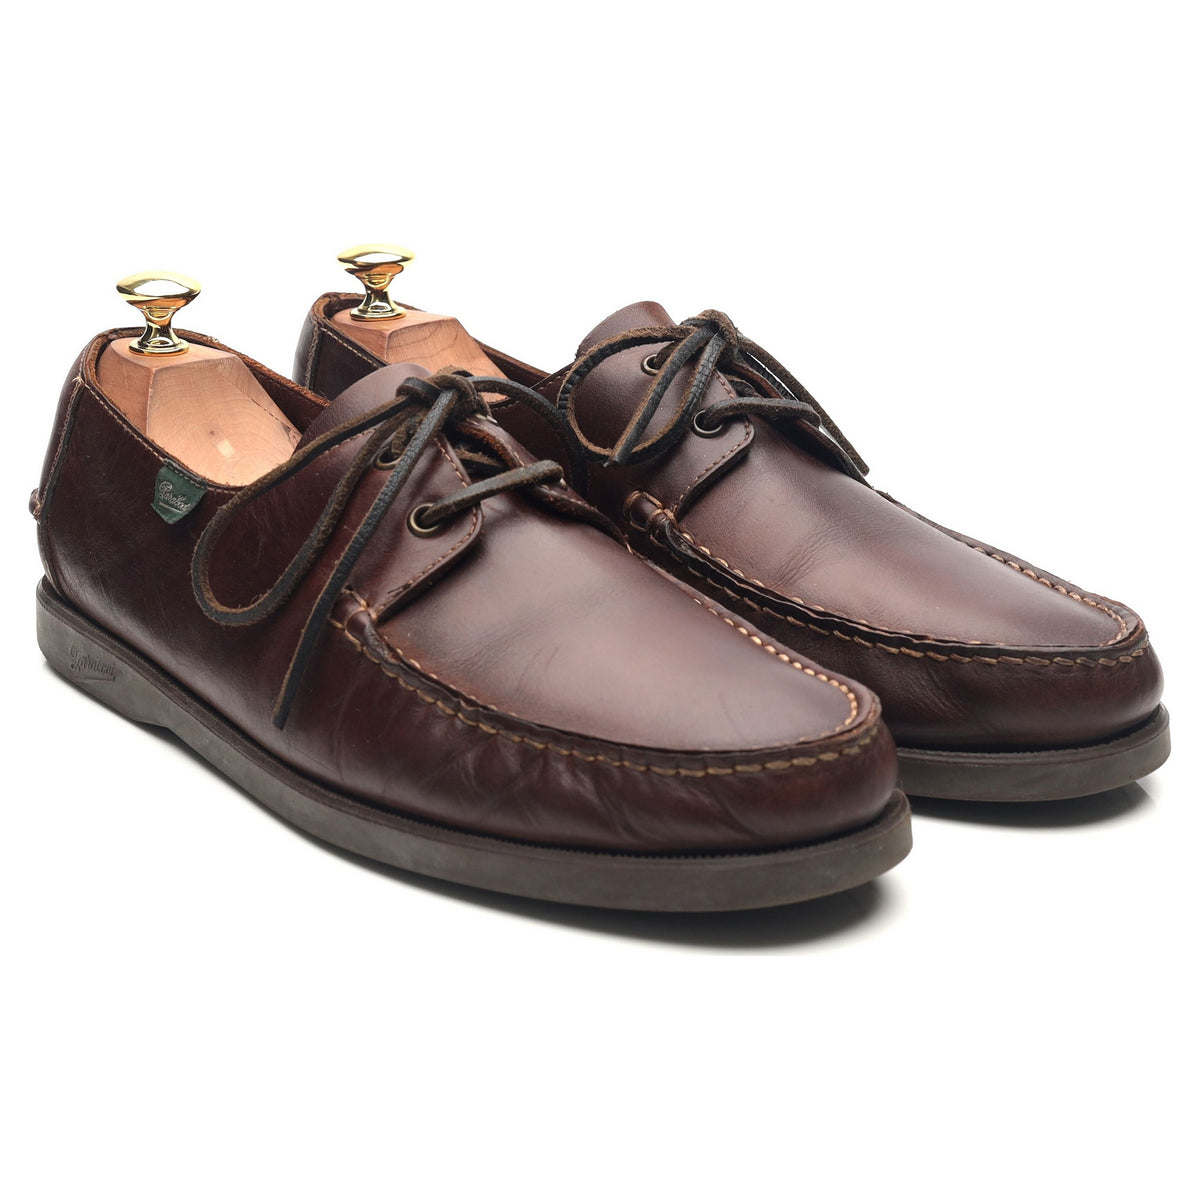 Dark Brown Leather Deck Shoes UK 9